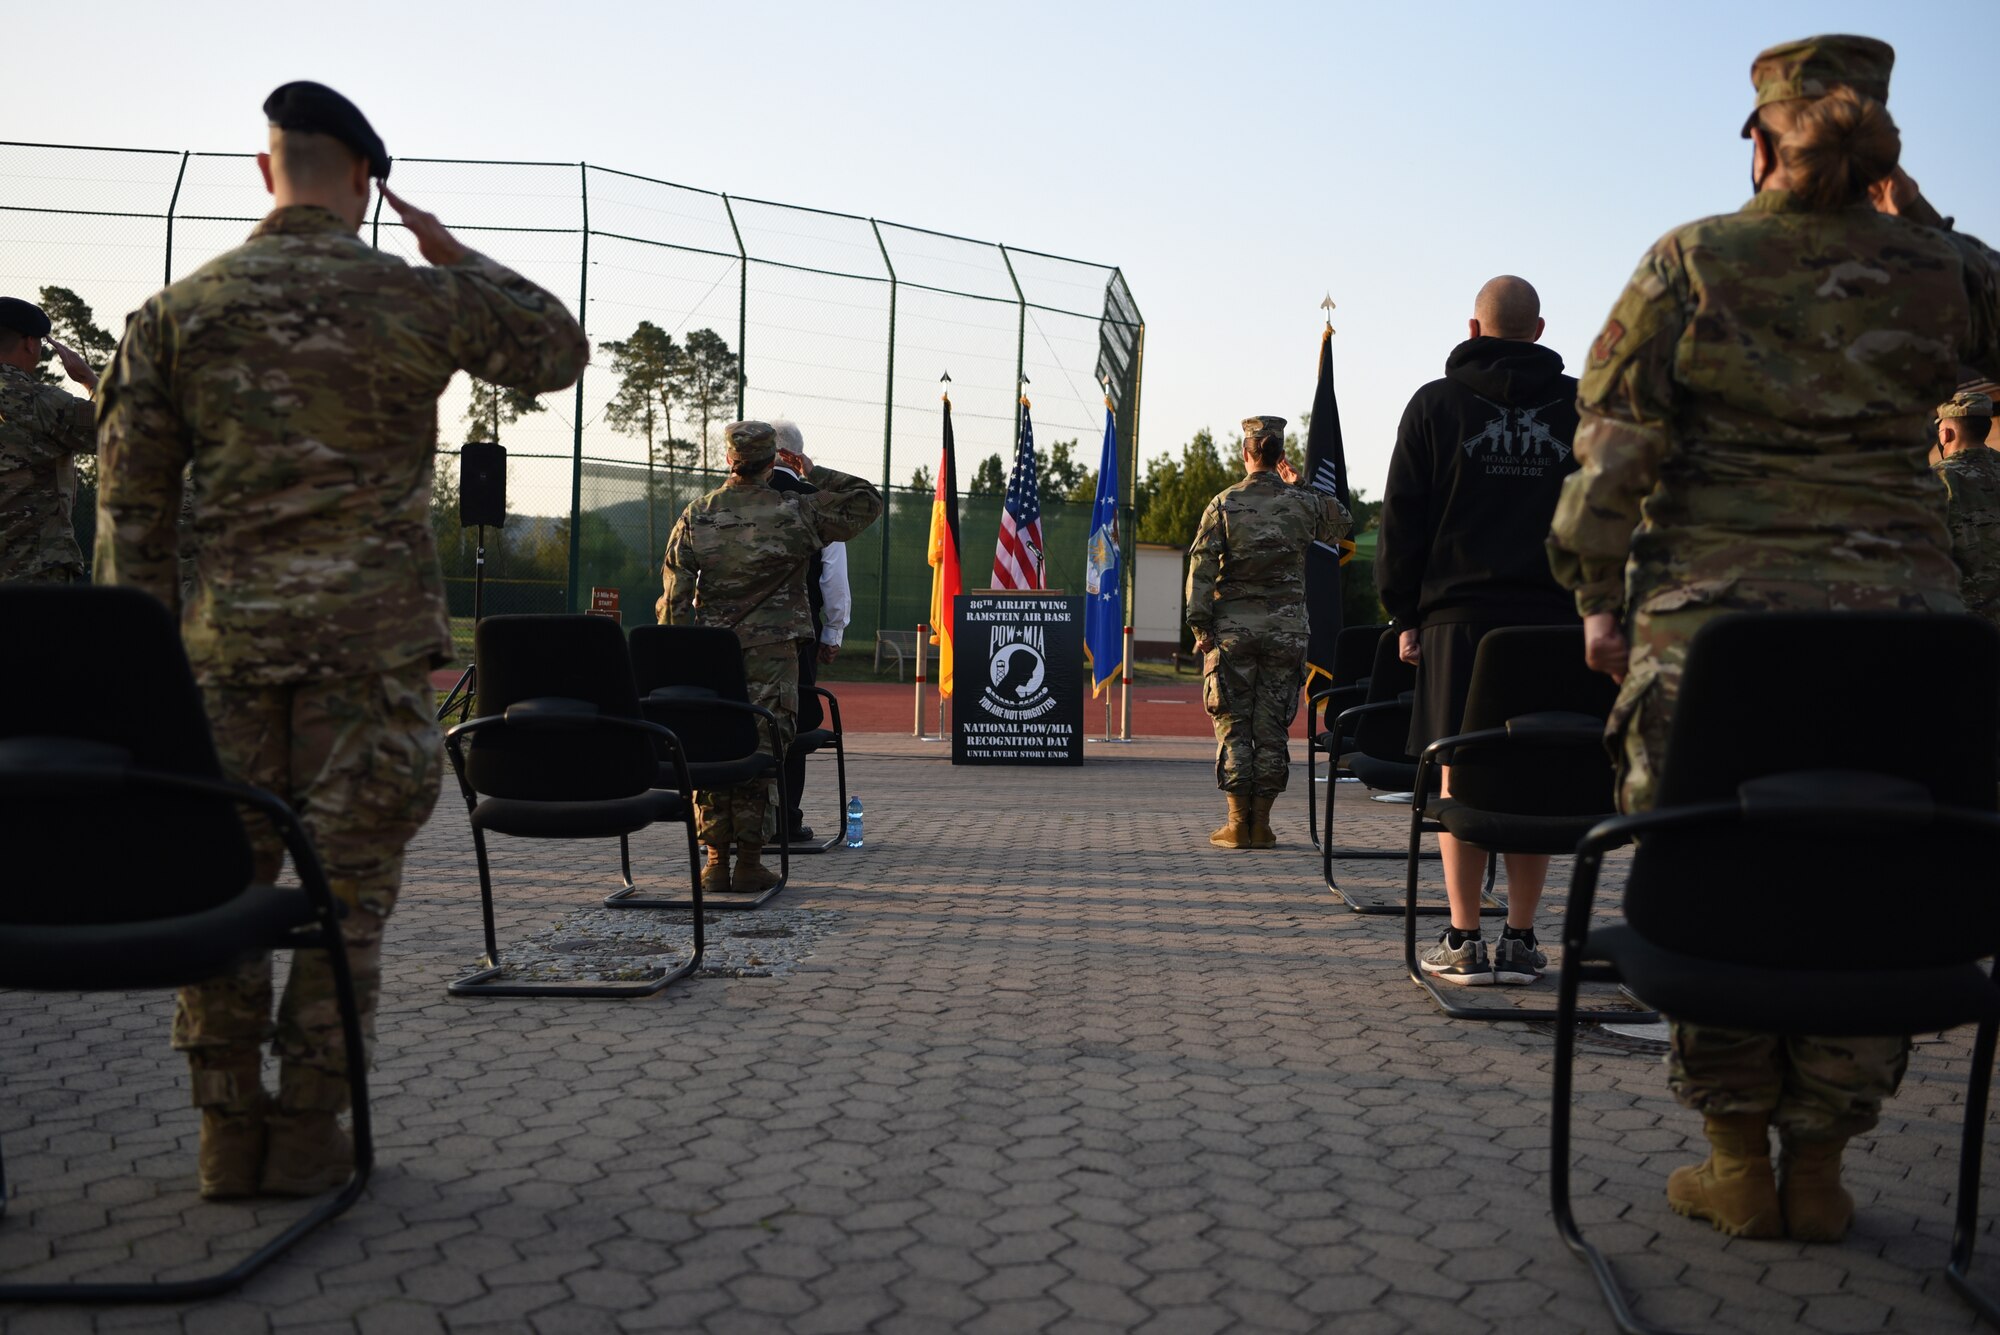 U.S. Air Force Airmen salute during the national anthem, signifying the beginning of the National POW/MIA Recognition Day ceremony at Ramstein Air Base, Germany, Sept. 18, 2020.